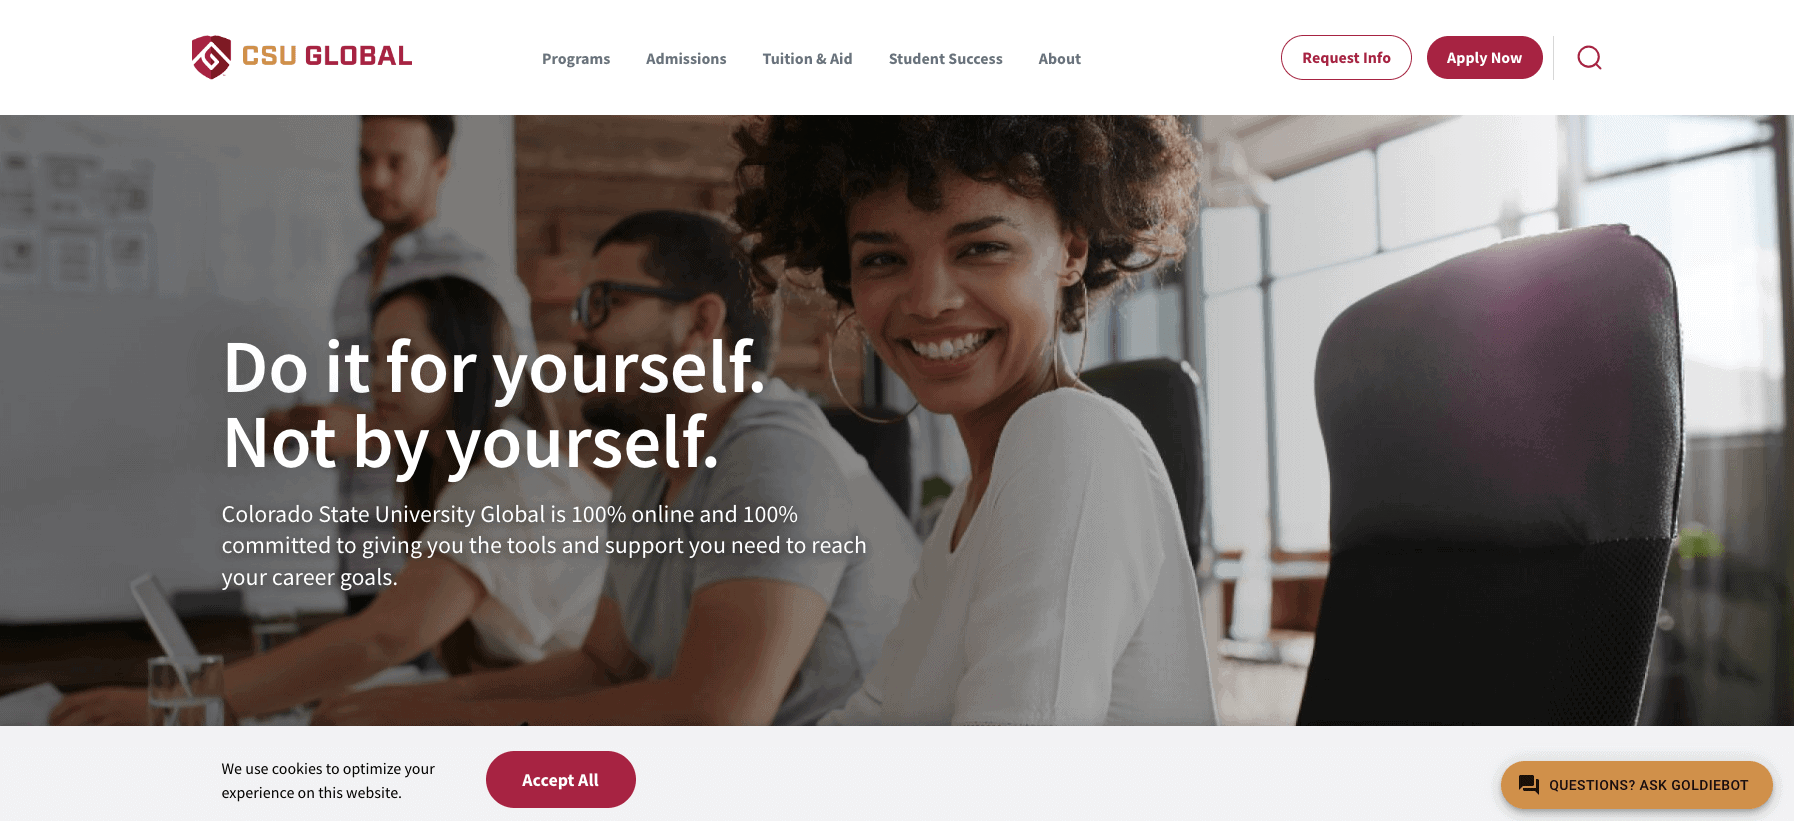 scu global homepage with banner image of smiling woman with curly black hair. overlay text says "do it for yourself. not by yourself"